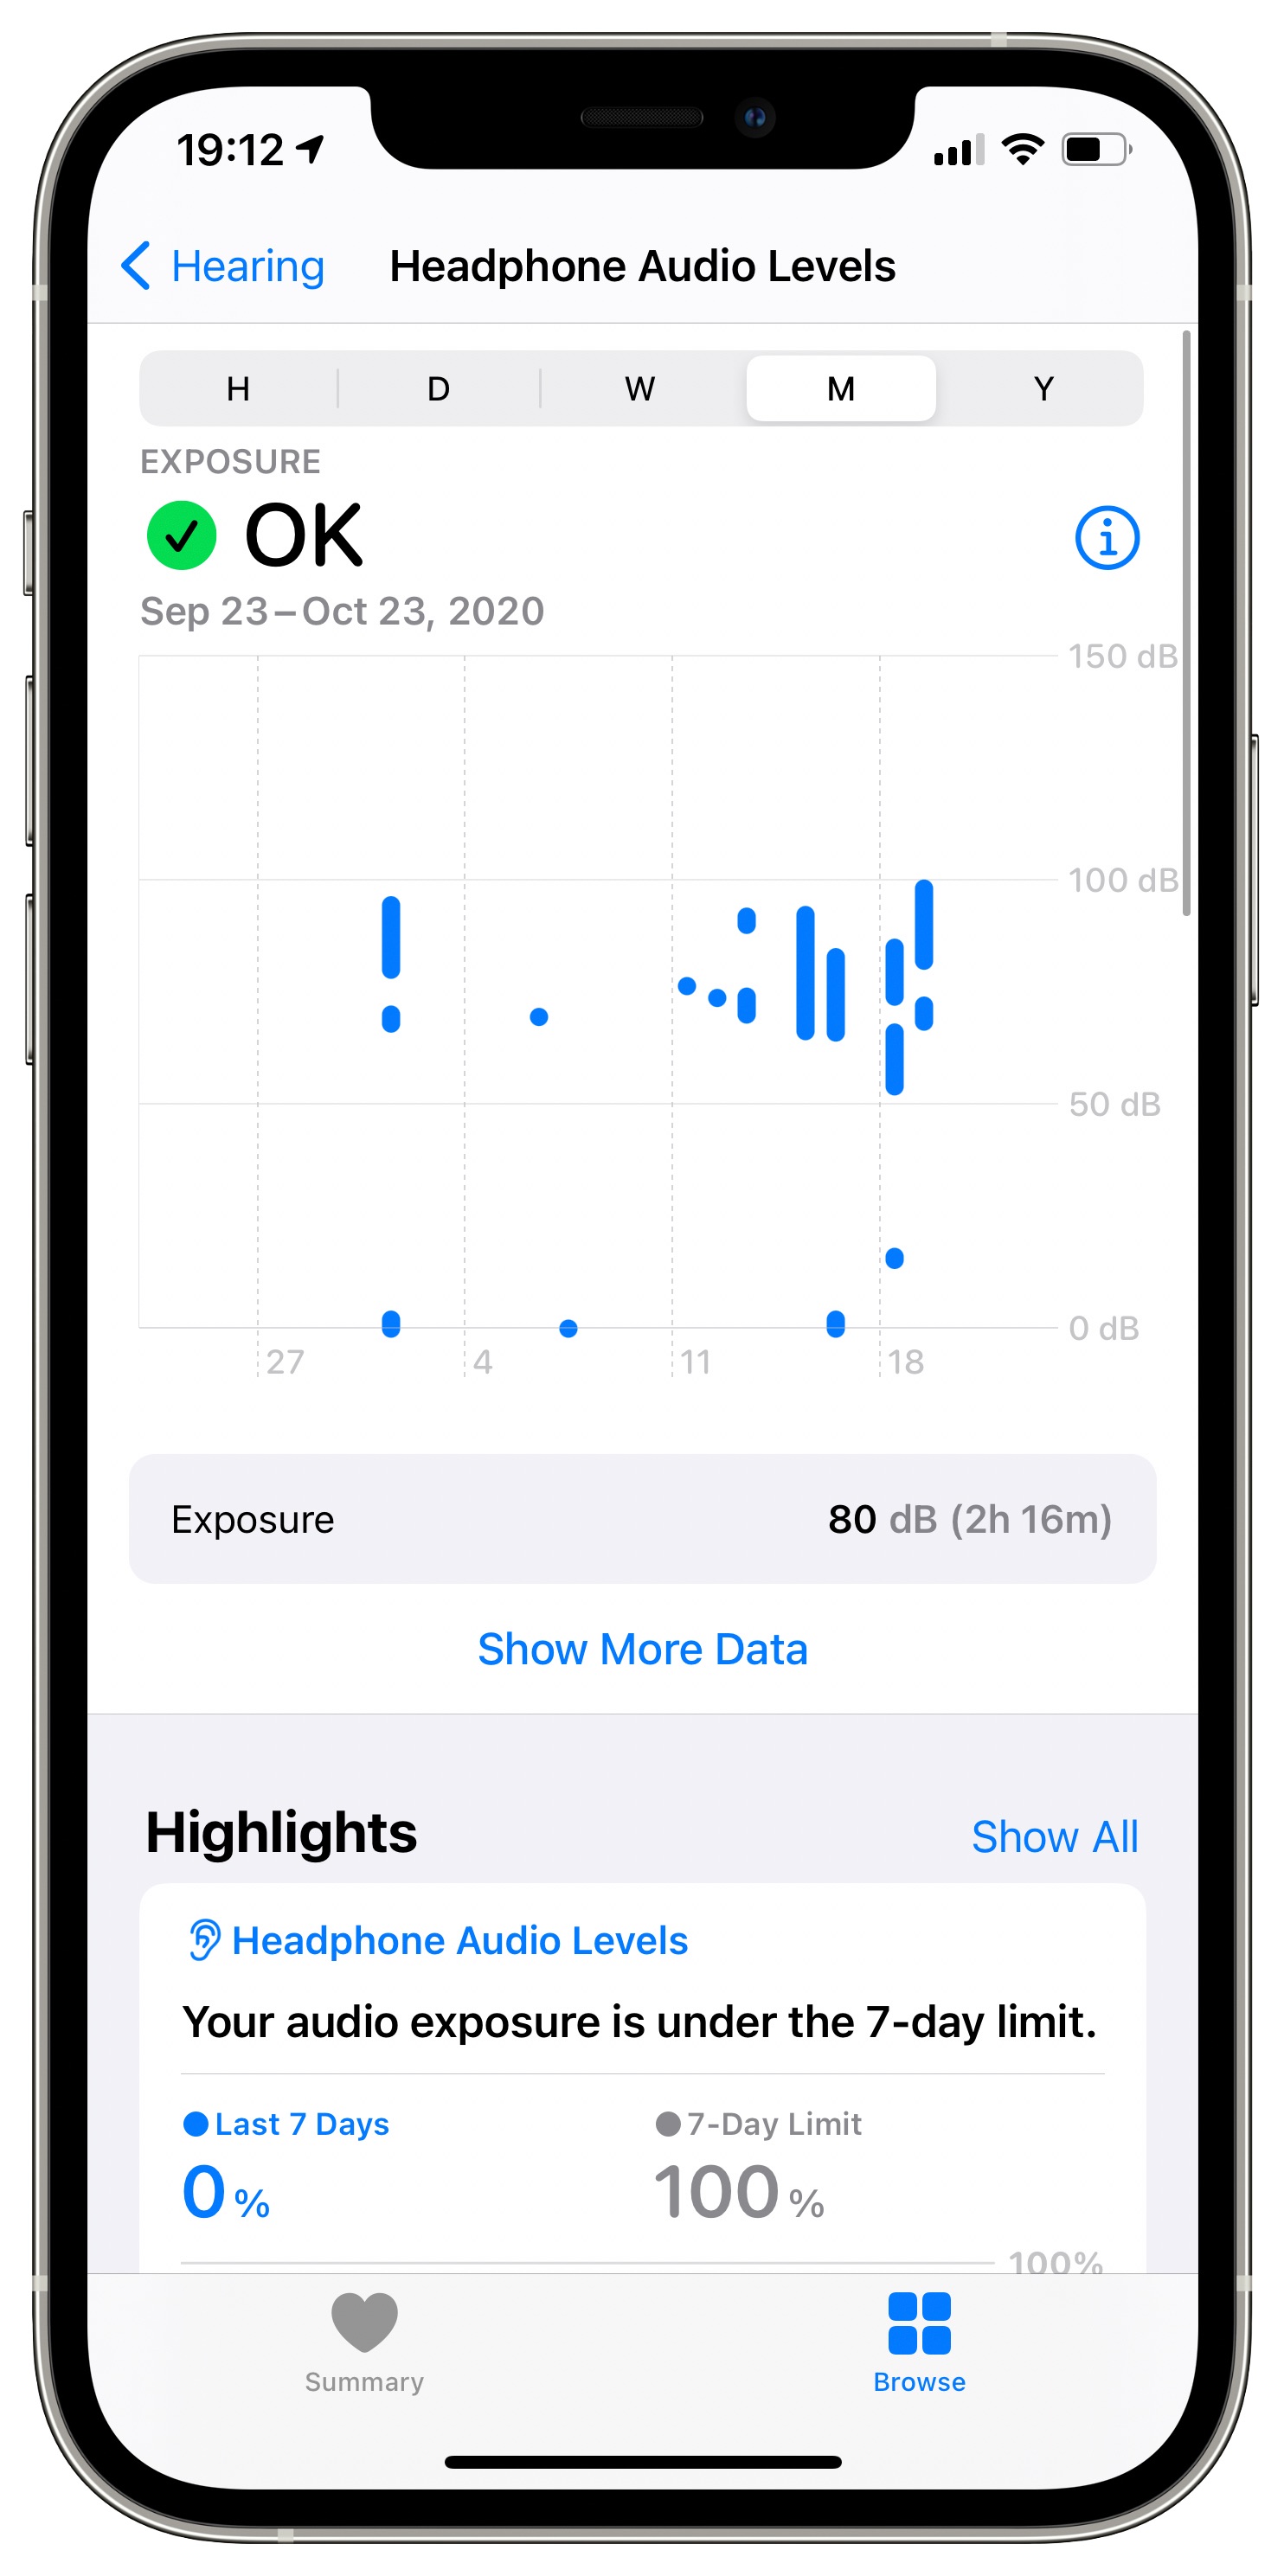 The Health app on iOS 14 with the Headphone Audio Levels screen on iPhone